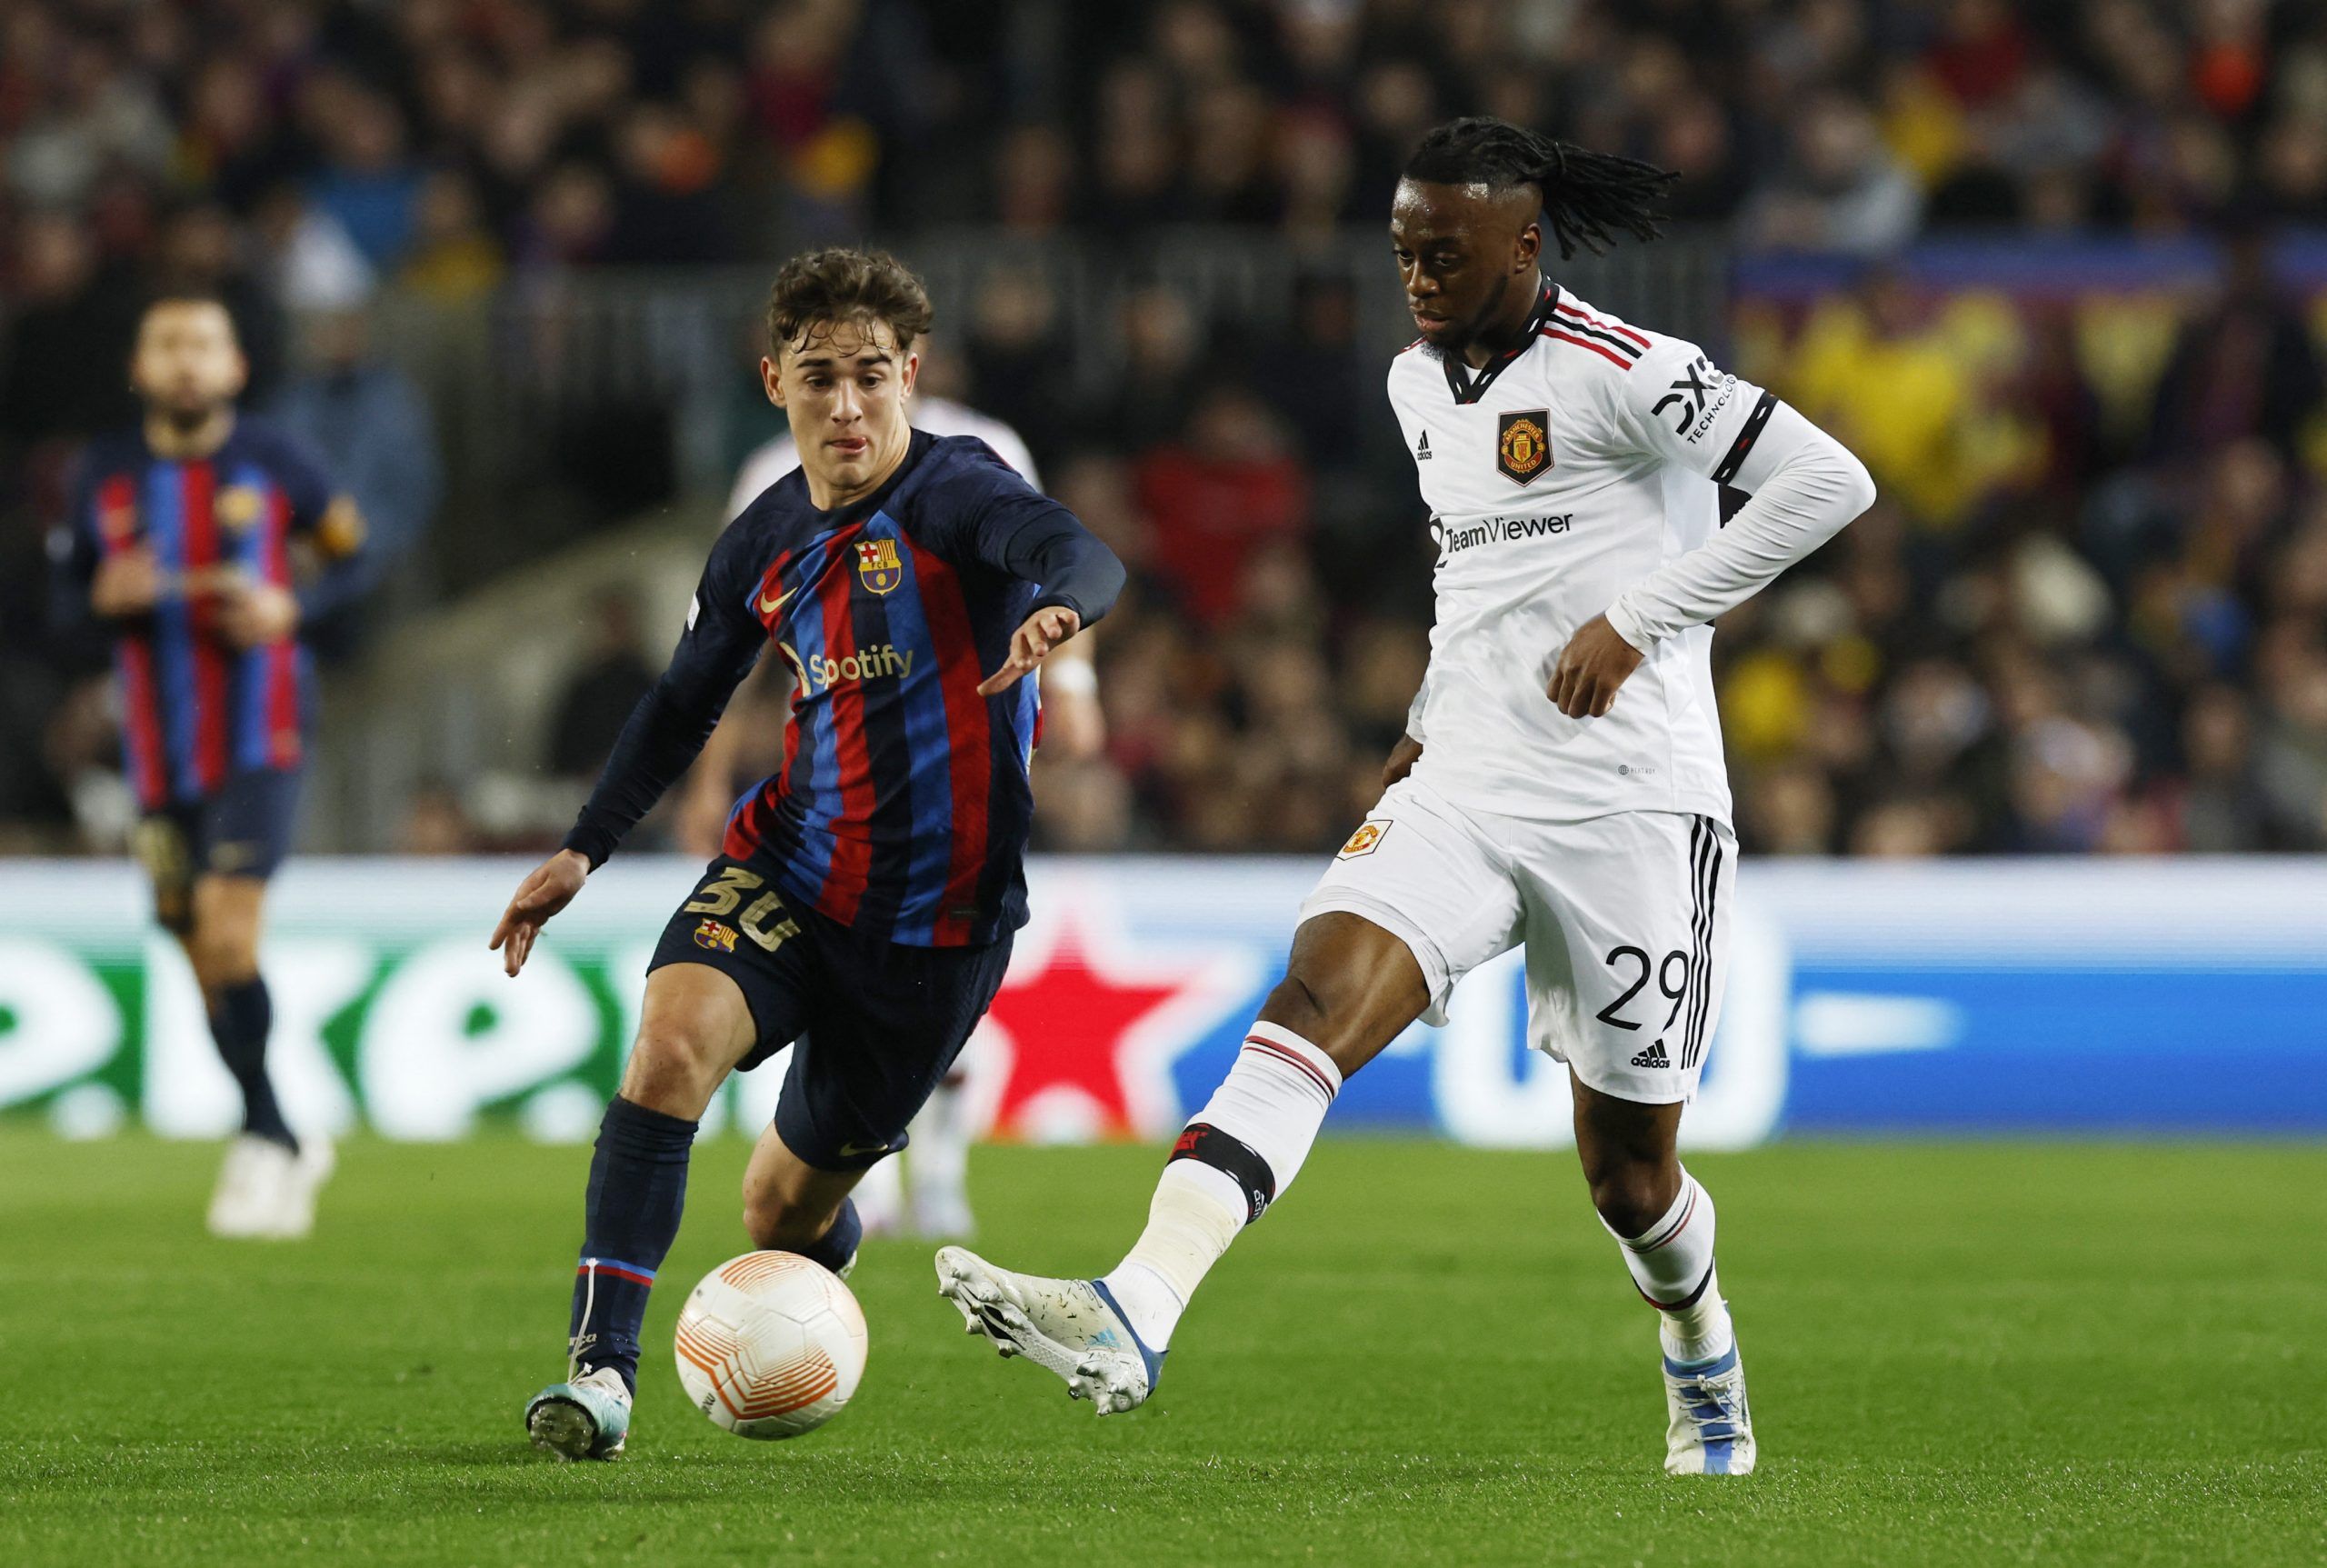 Soccer Football - Europa League - Play-Off First Leg - FC Barcelona v Manchester United - Camp Nou, Barcelona, Spain - February 16, 2023  FC Barcelona's Gavi in action with Manchester United's Aaron Wan-Bissaka REUTERS/Albert Gea